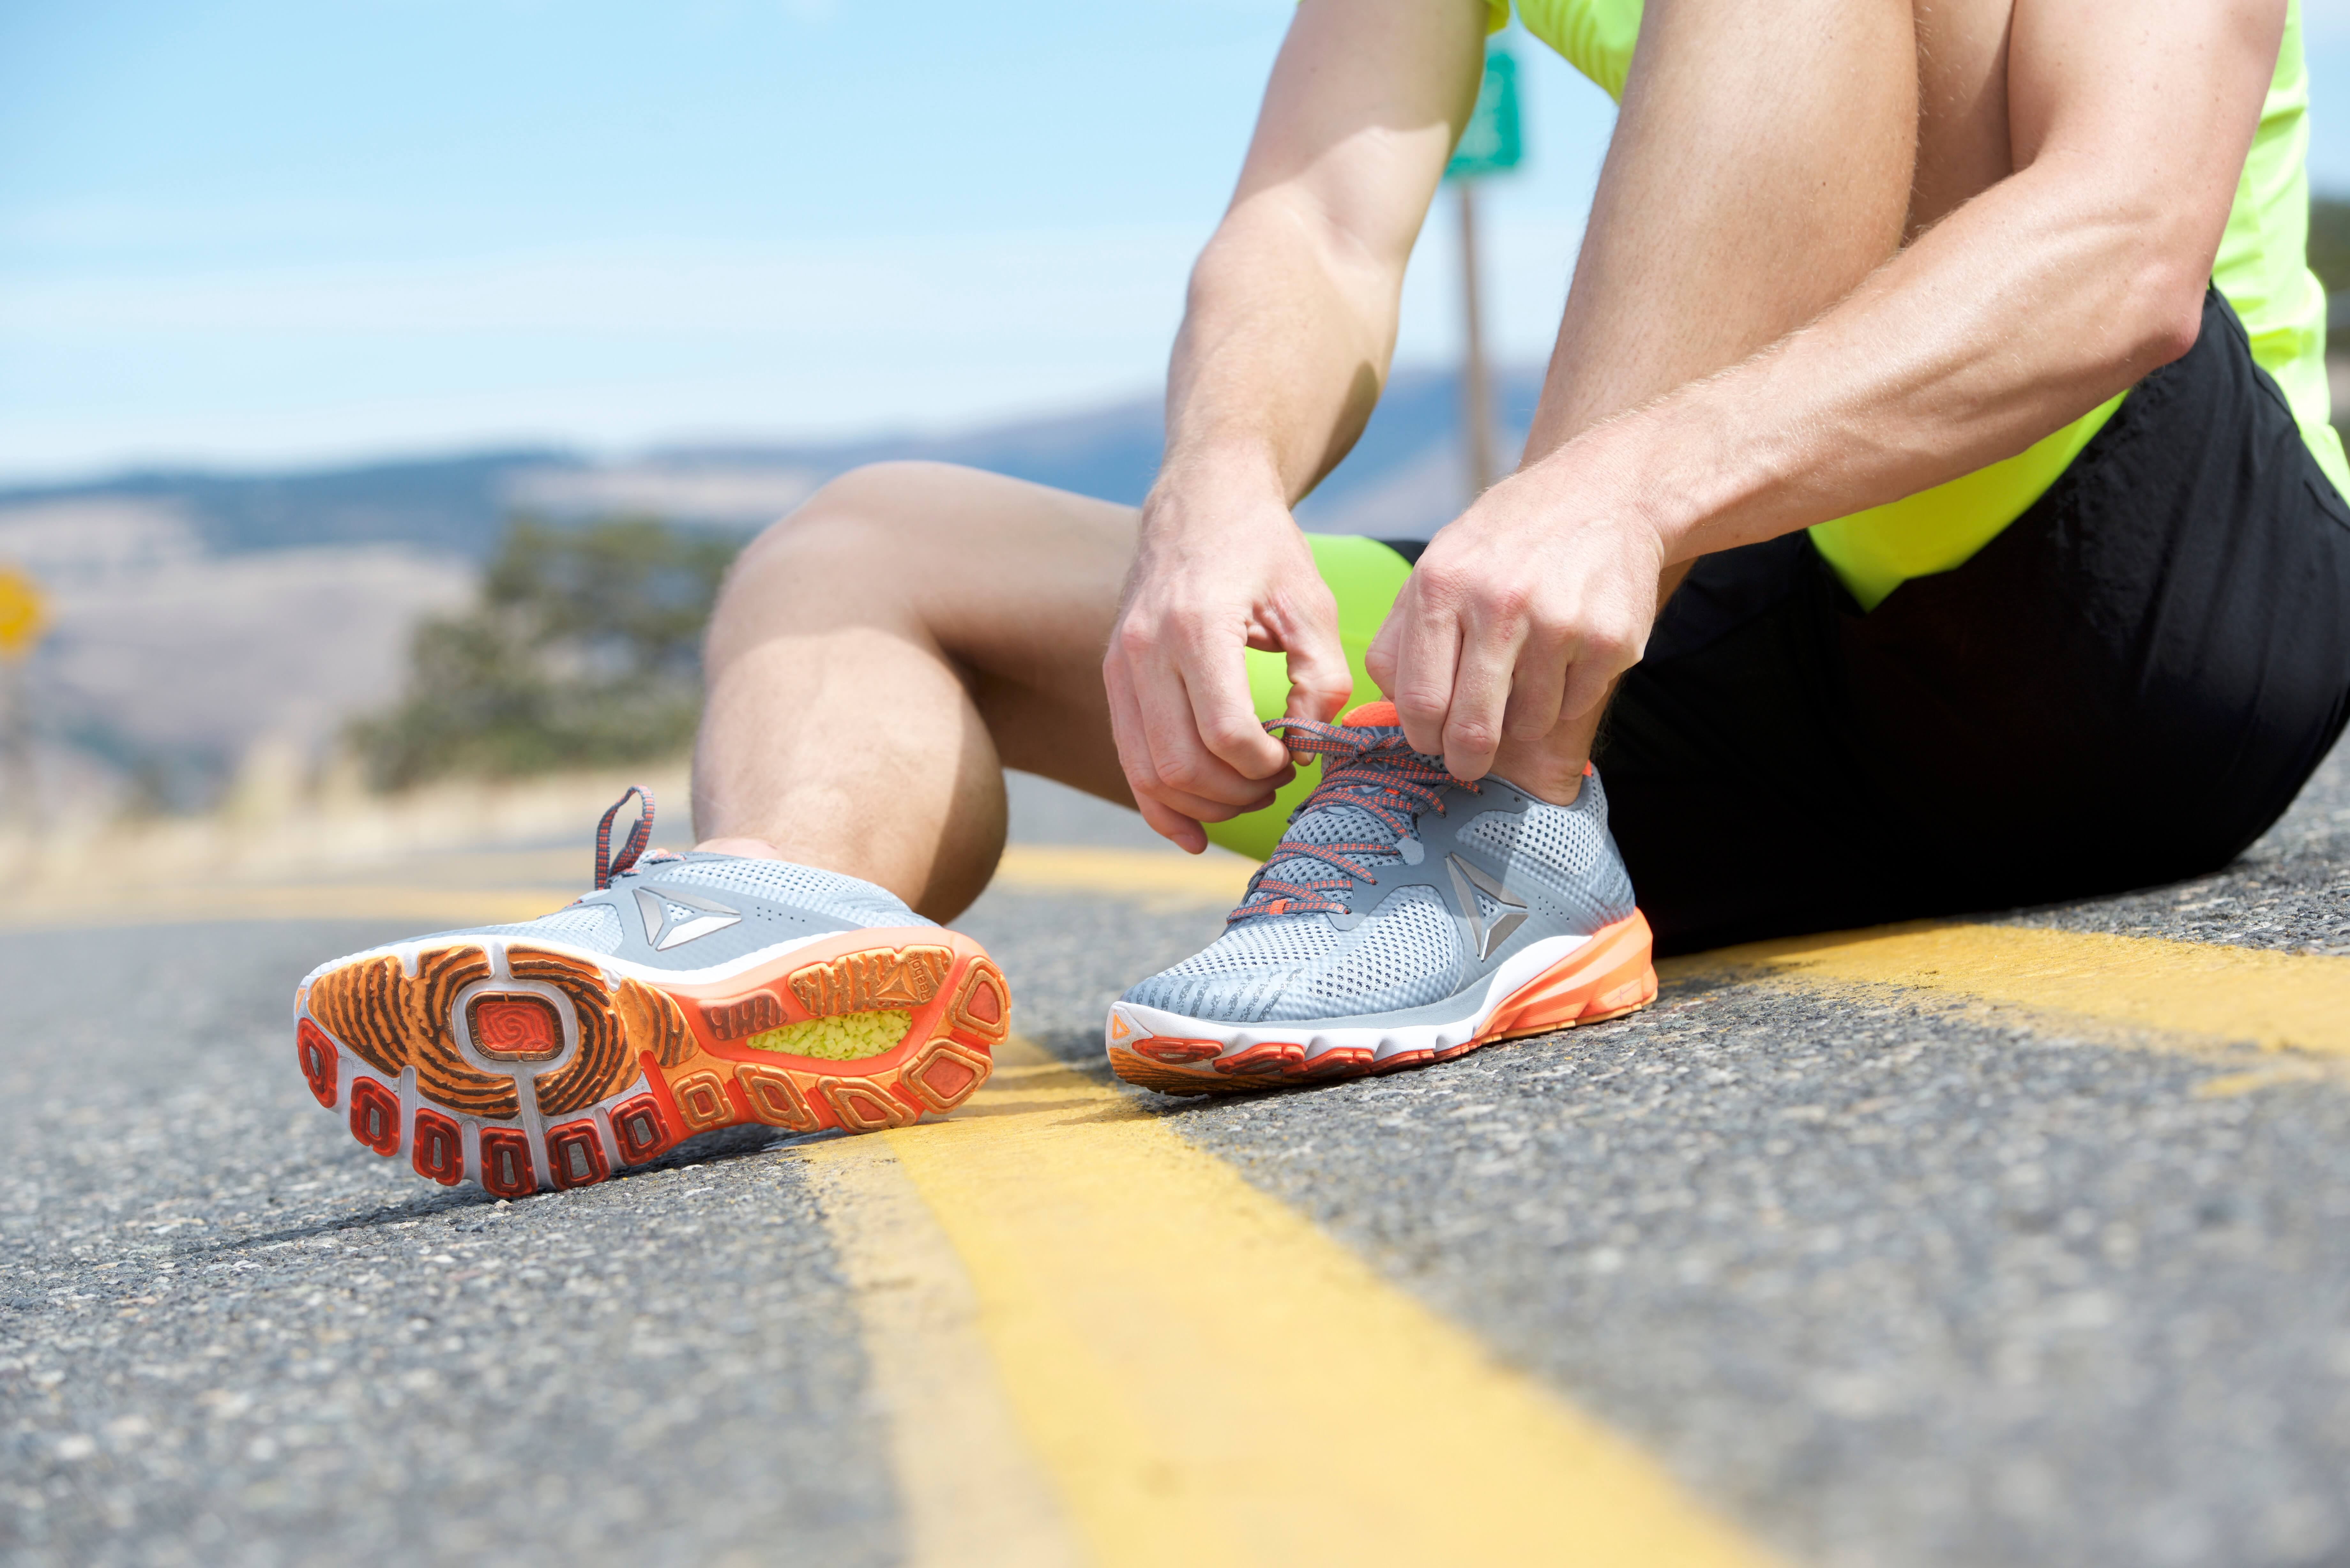 How to Lace Running Shoes, According to 